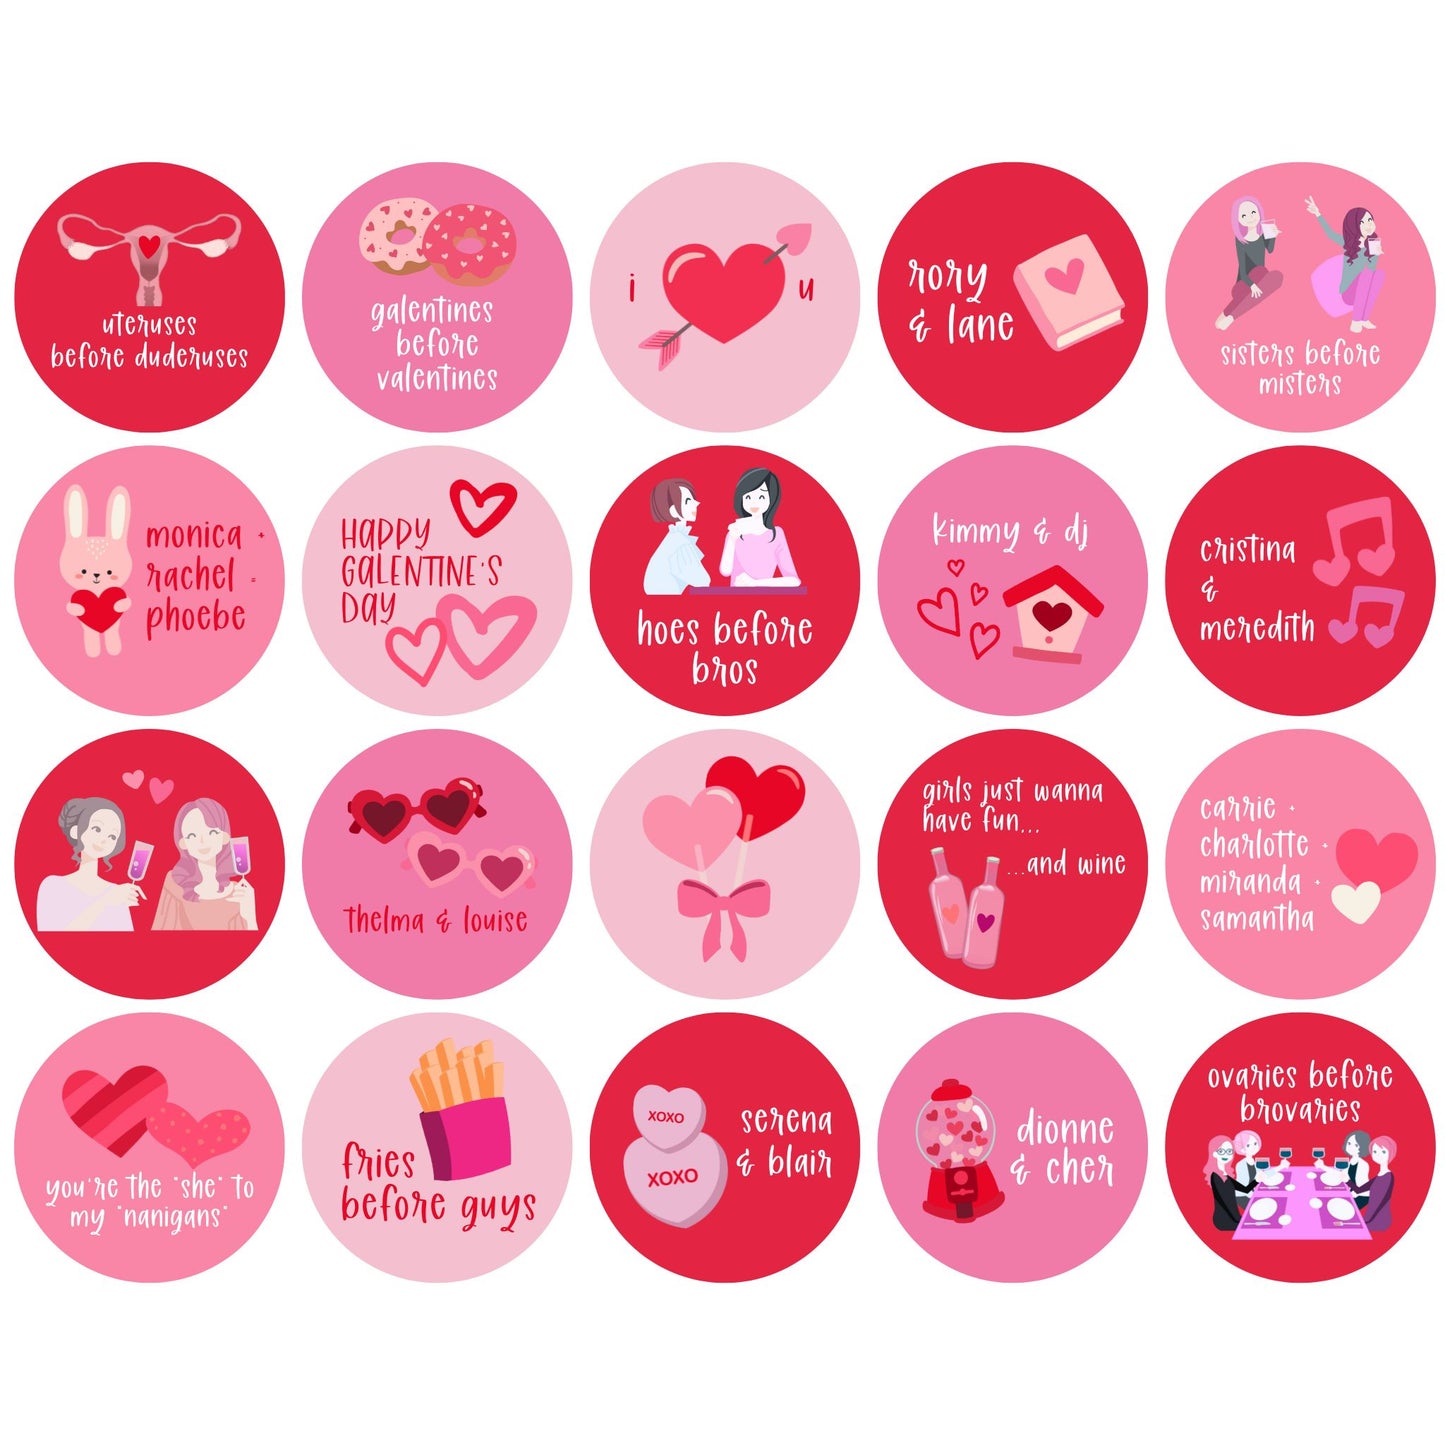 Galentine's Day Party Printable Package